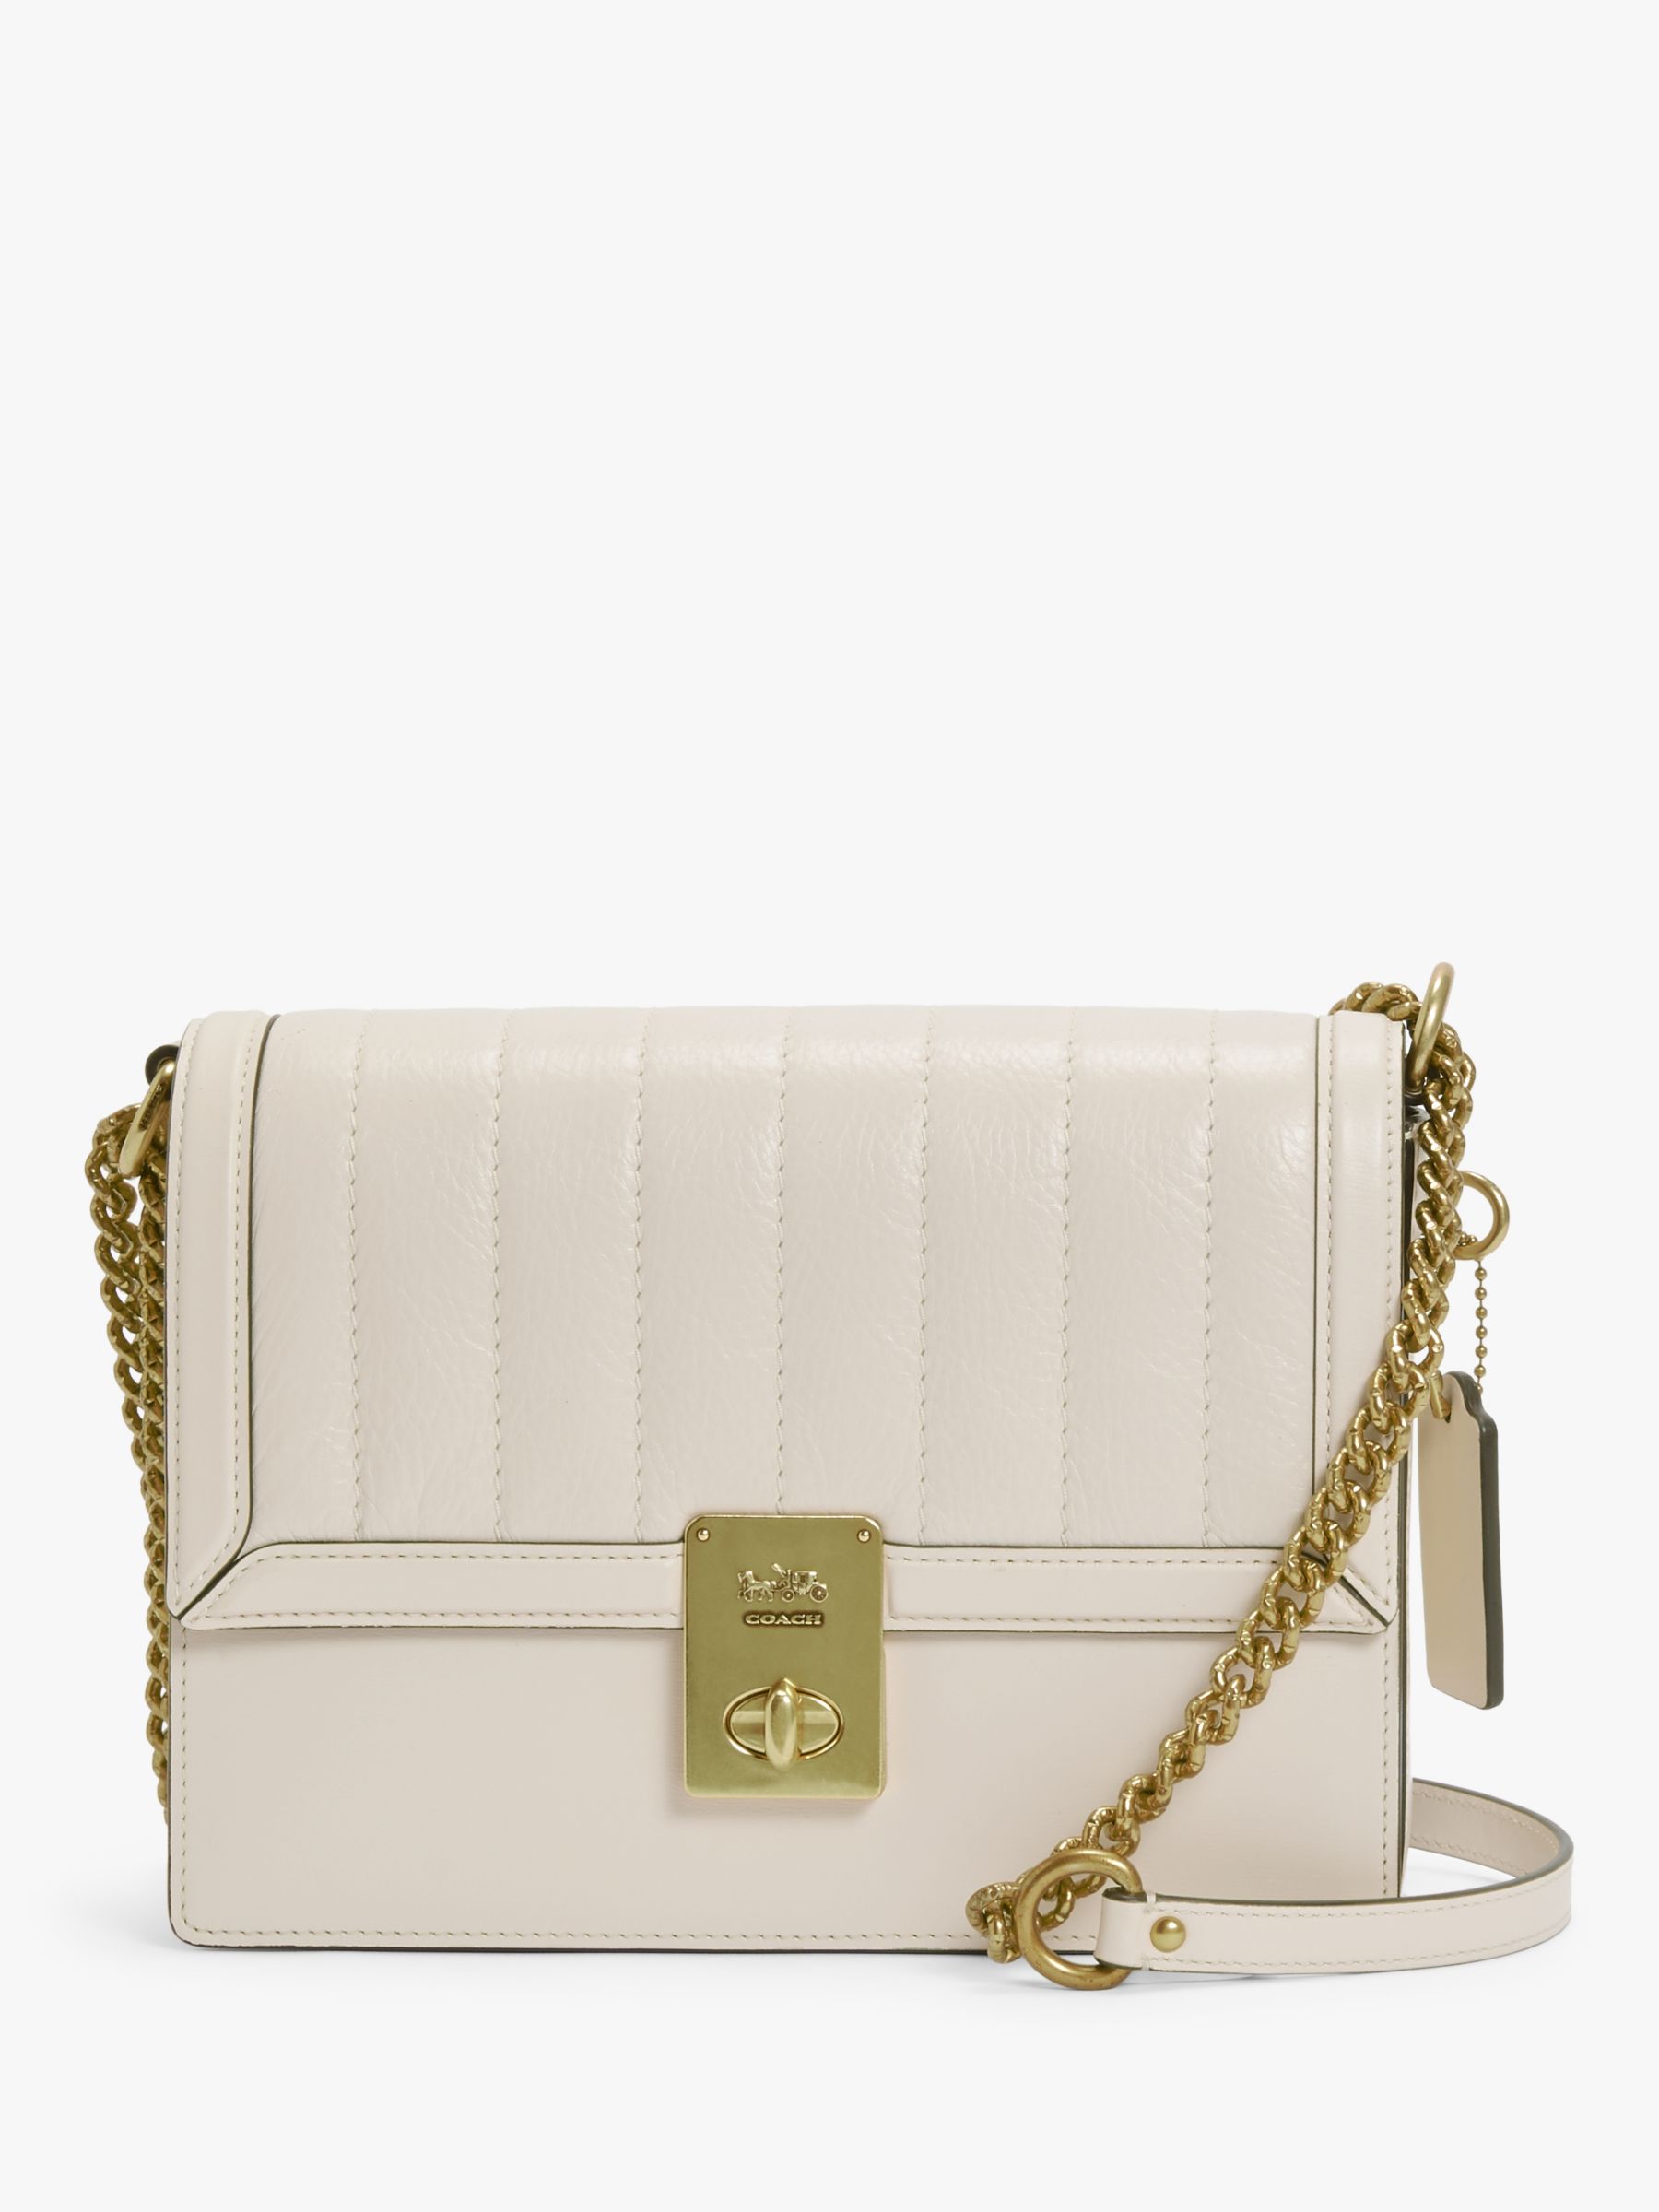 Coach Hutton Quilted Leather Shoulder Bag at John Lewis & Partners